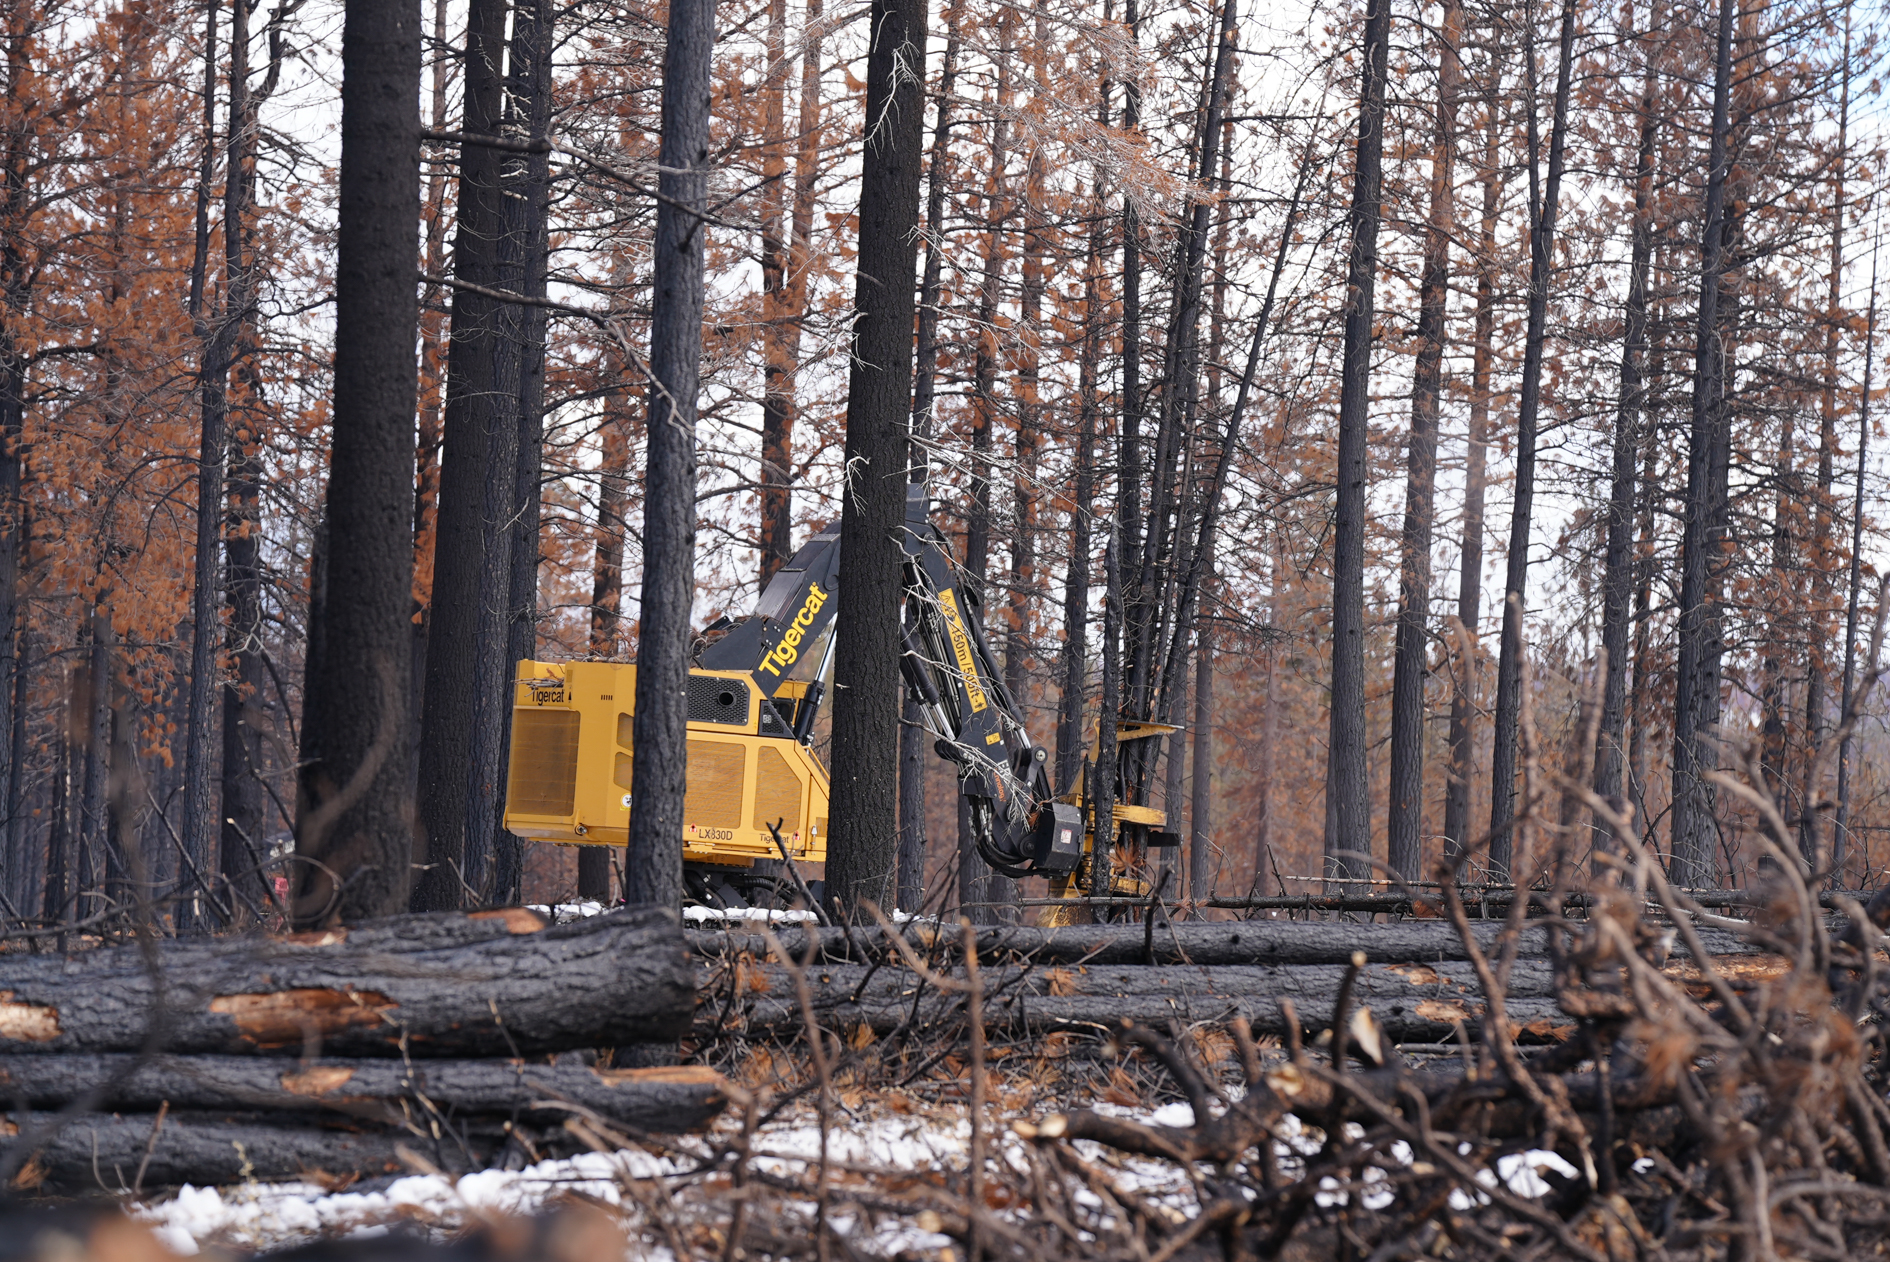 Harvesting timber in the Klamath NF